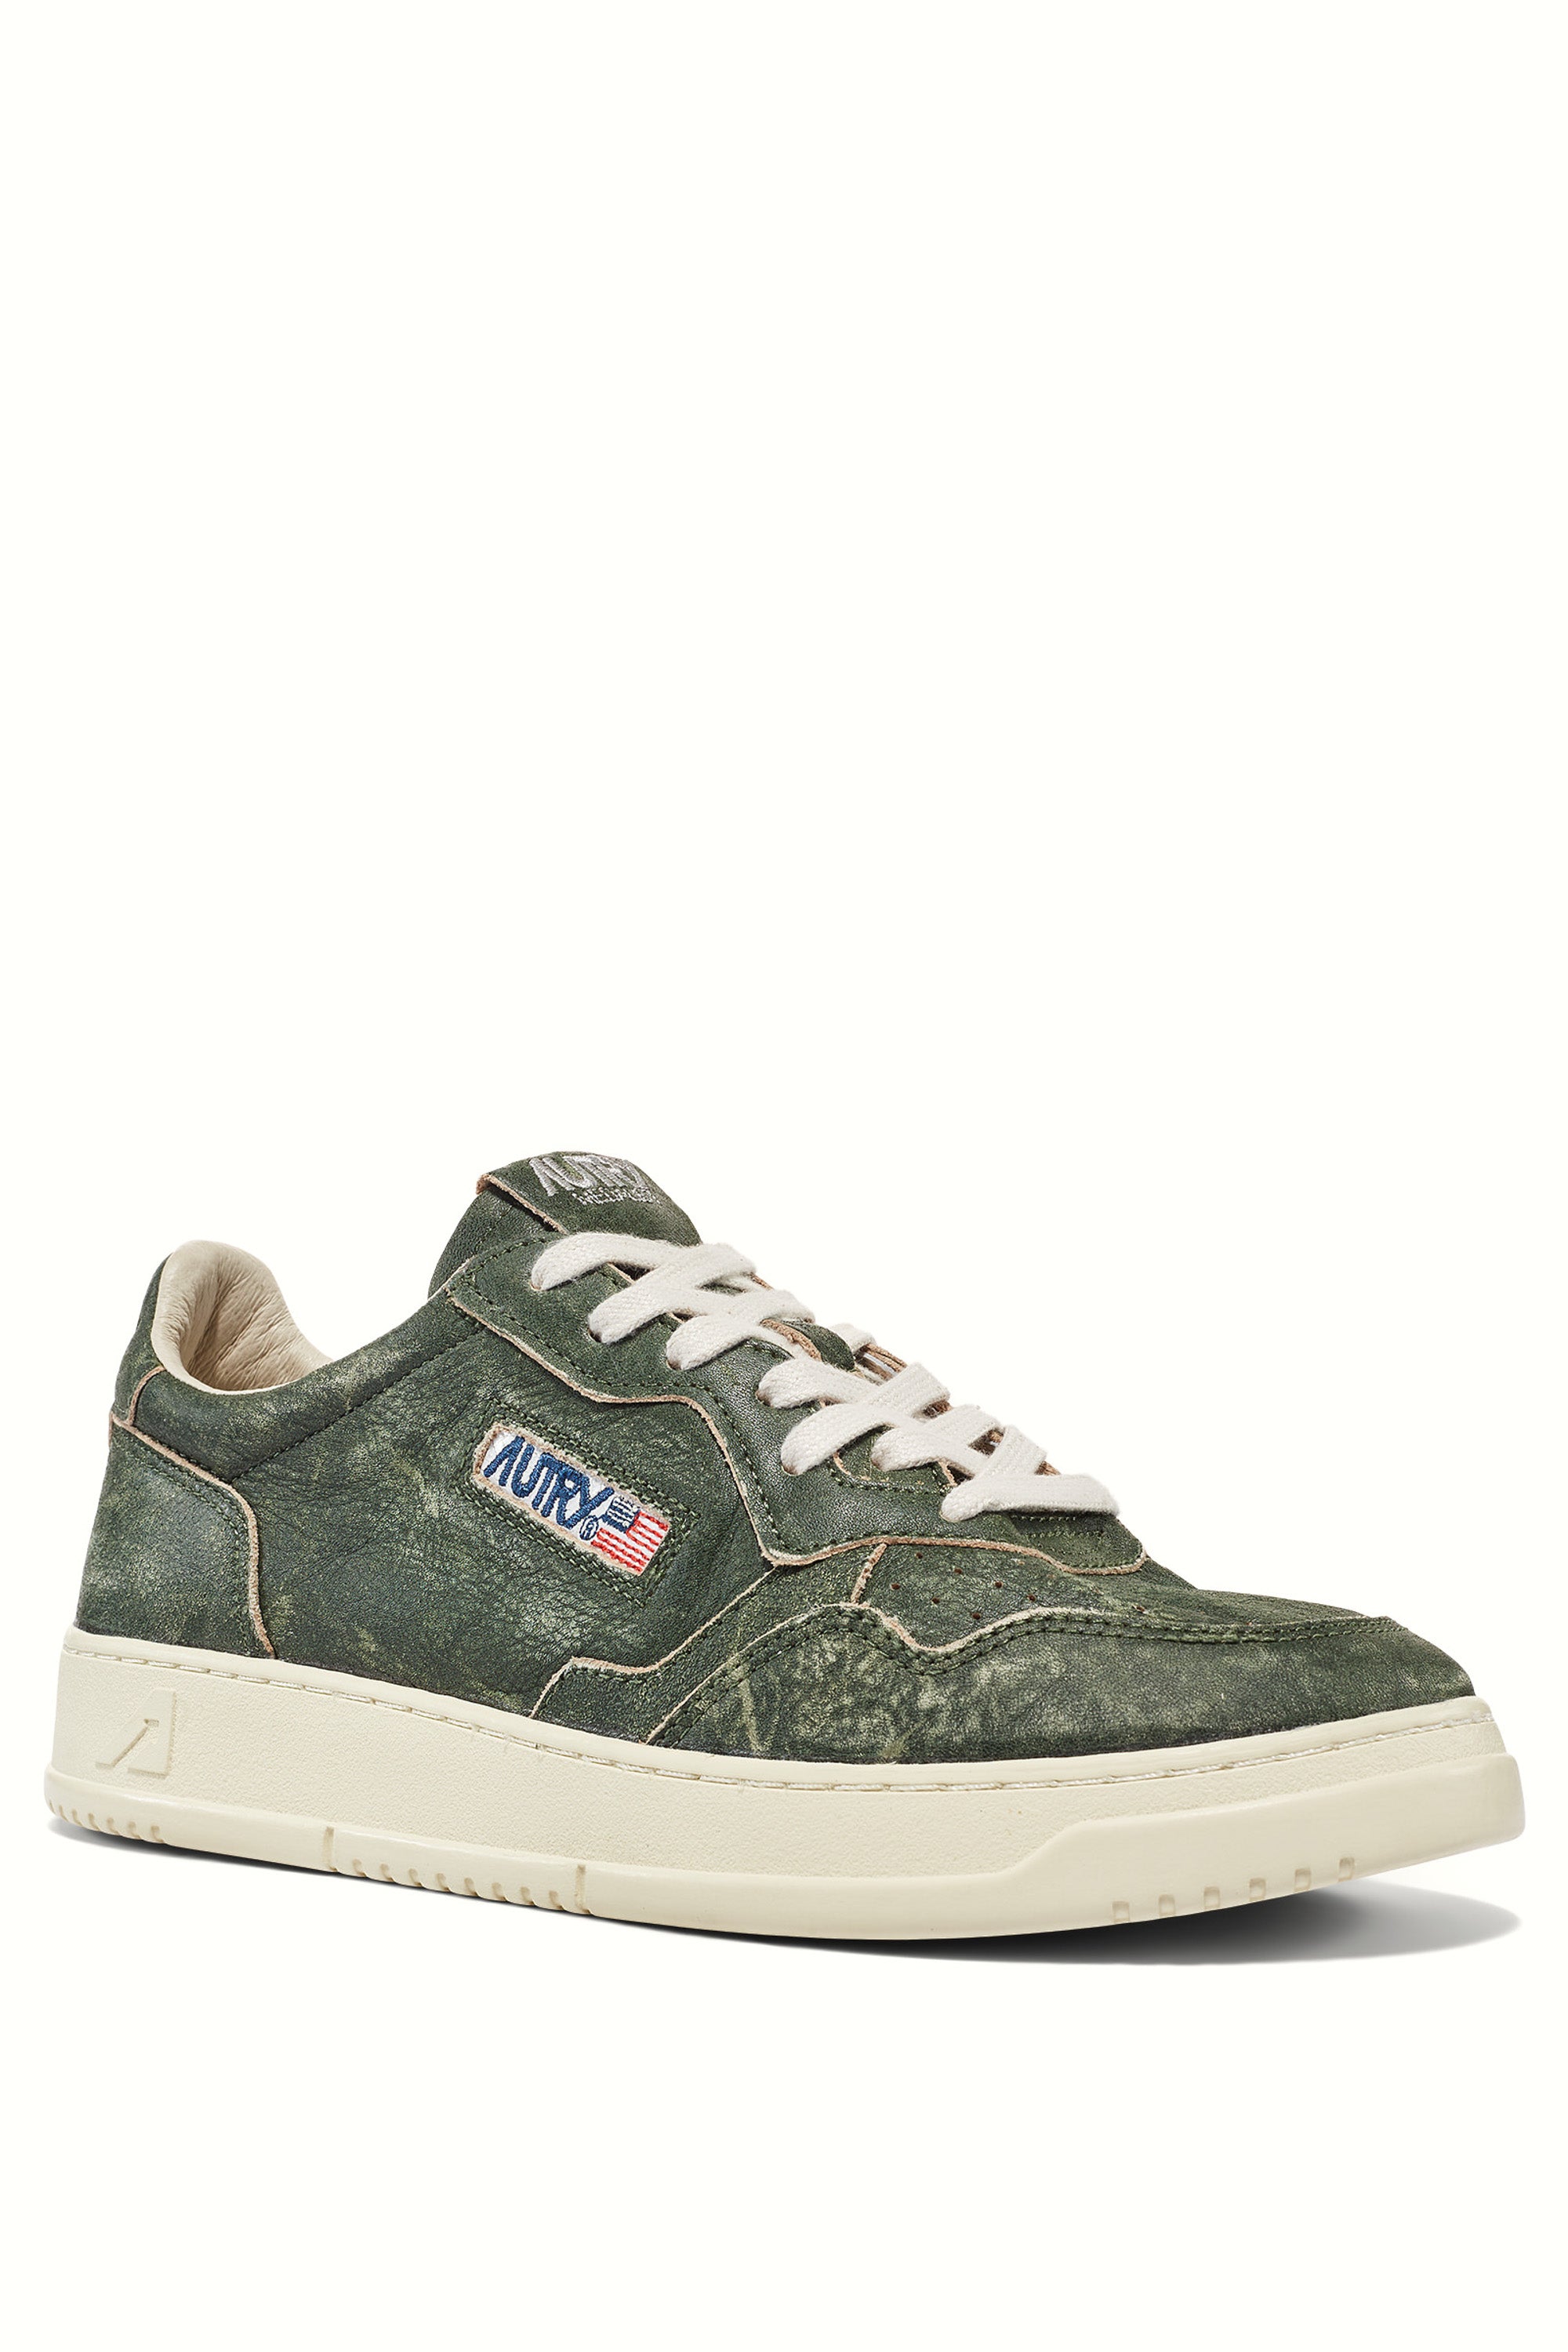 Medalist sneaker in supersoft cowhide leather